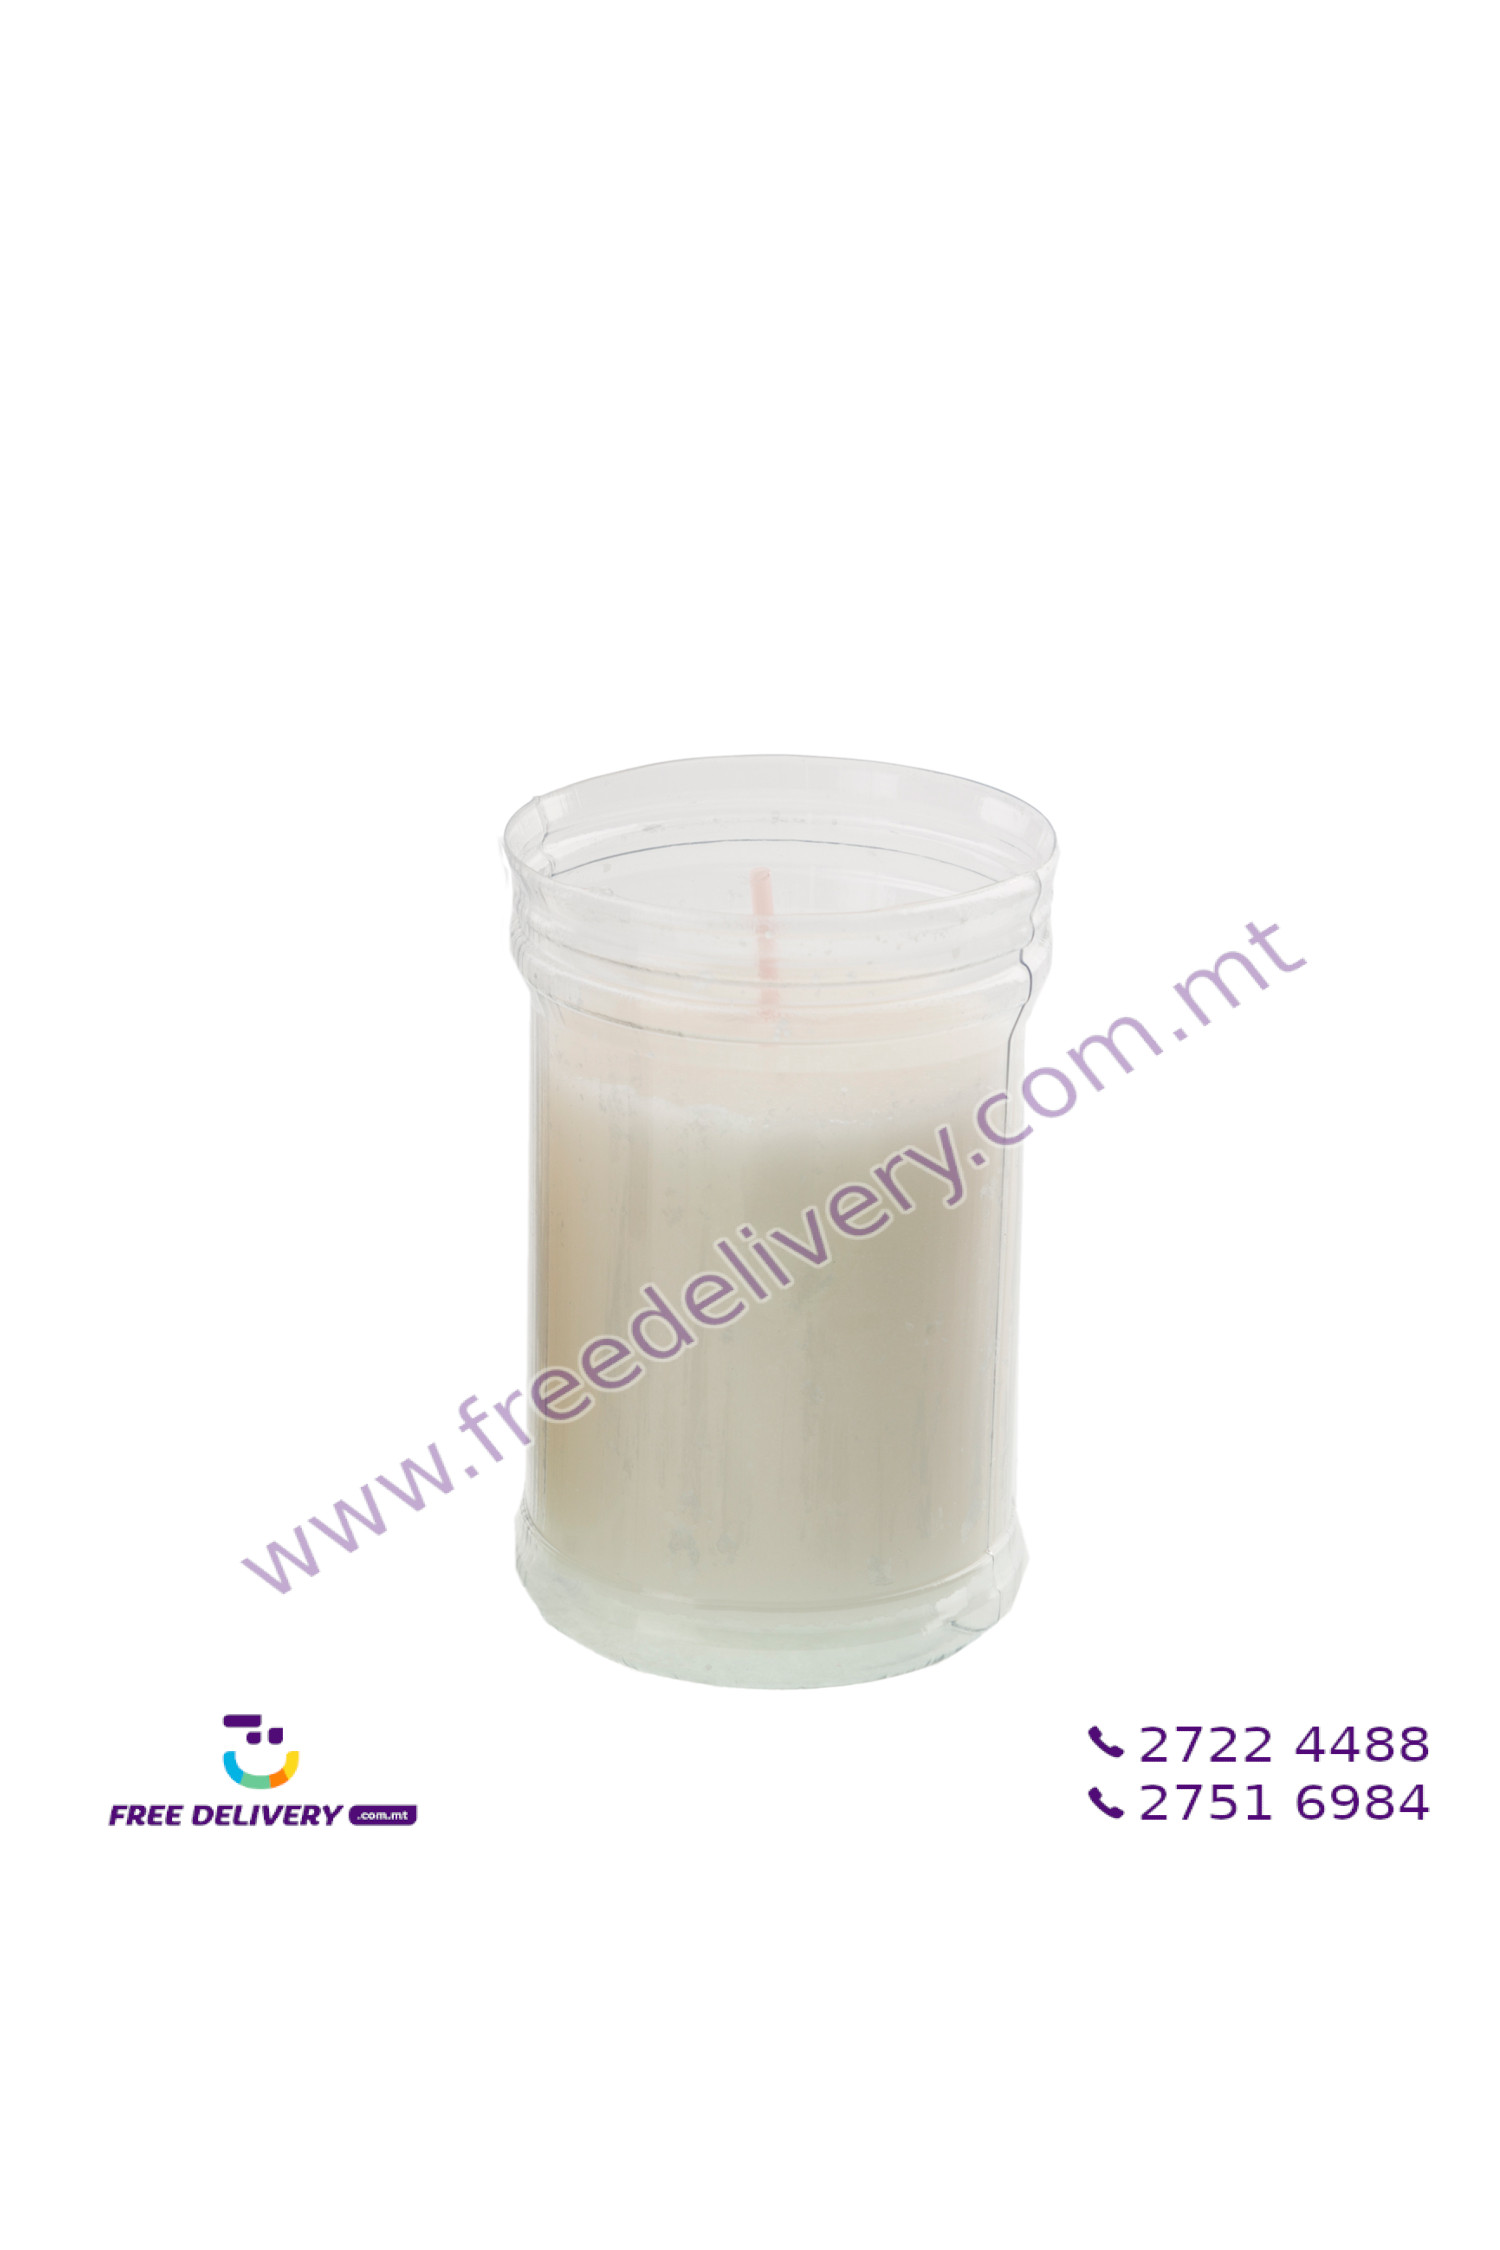 36 HOUR WHITE CANDLE. VM010119